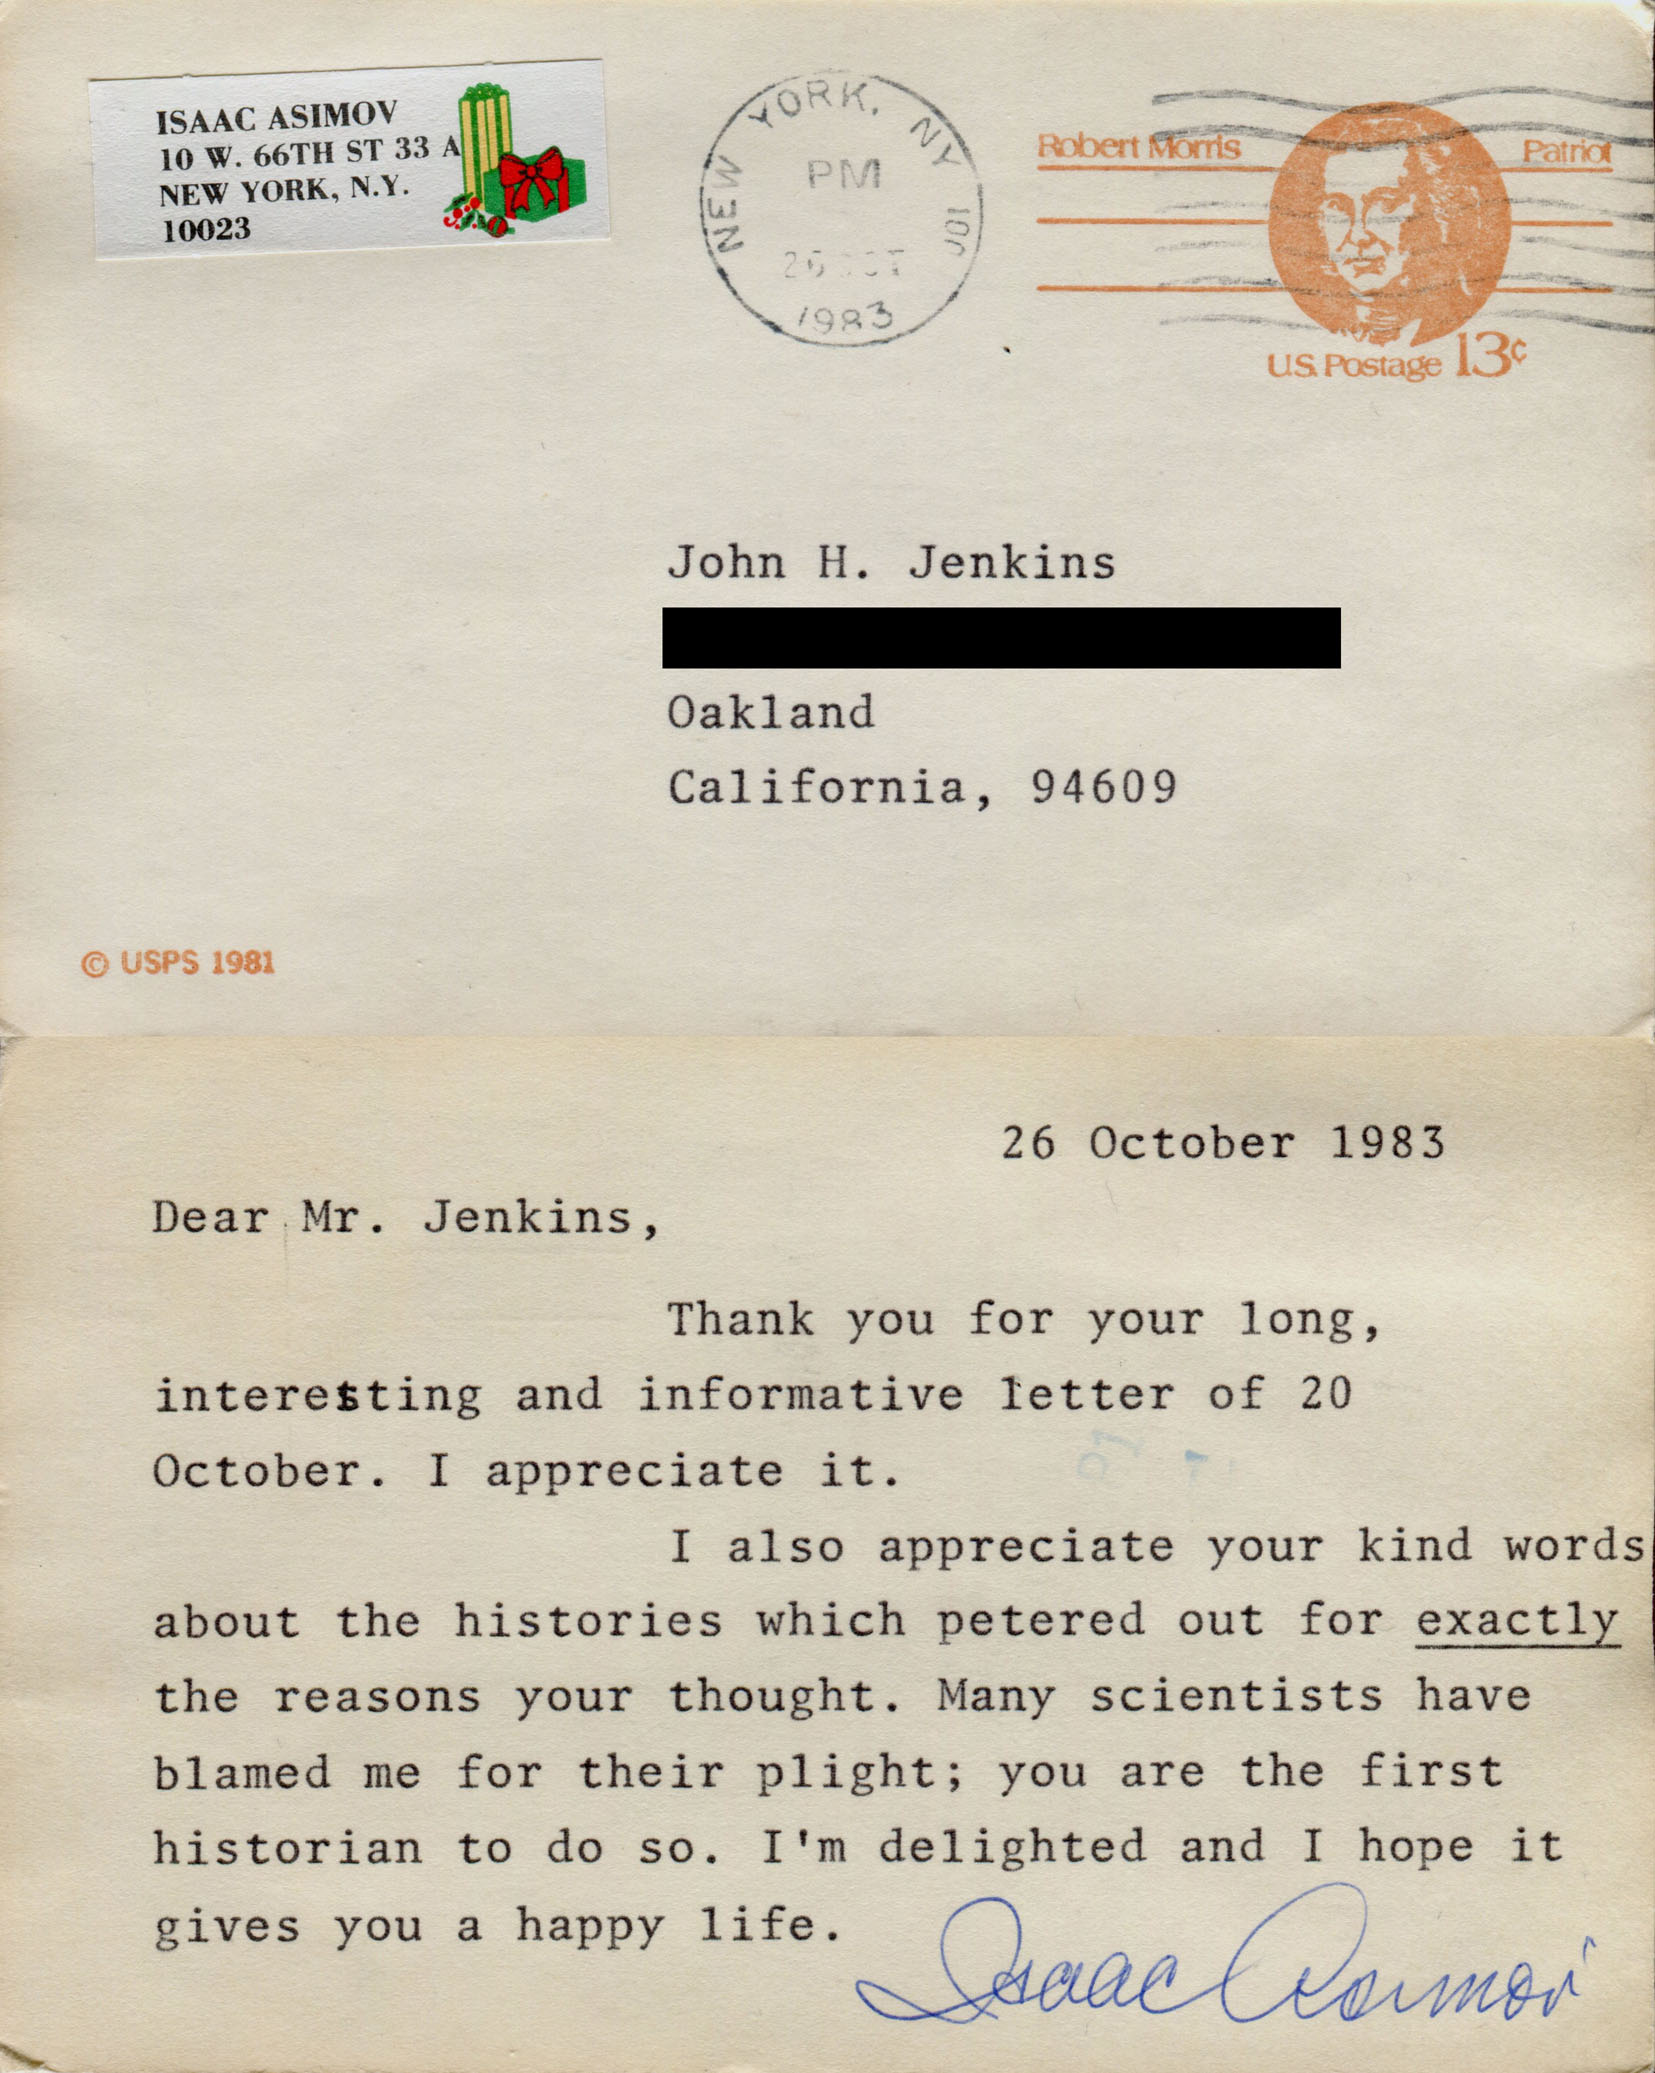 26 October 1983. Dear Mr. Jenkins, Thank you for your long, interesting and informative letter of 20 October. I appreciate it. I also appreciate your kind words about the histories which petered out for *exactly* the reasons your thought. Many scientists have blamed me for their plight; you are the first historian to do so. I'm delighted and I hope it gives you a happy life. Isaac Asimov